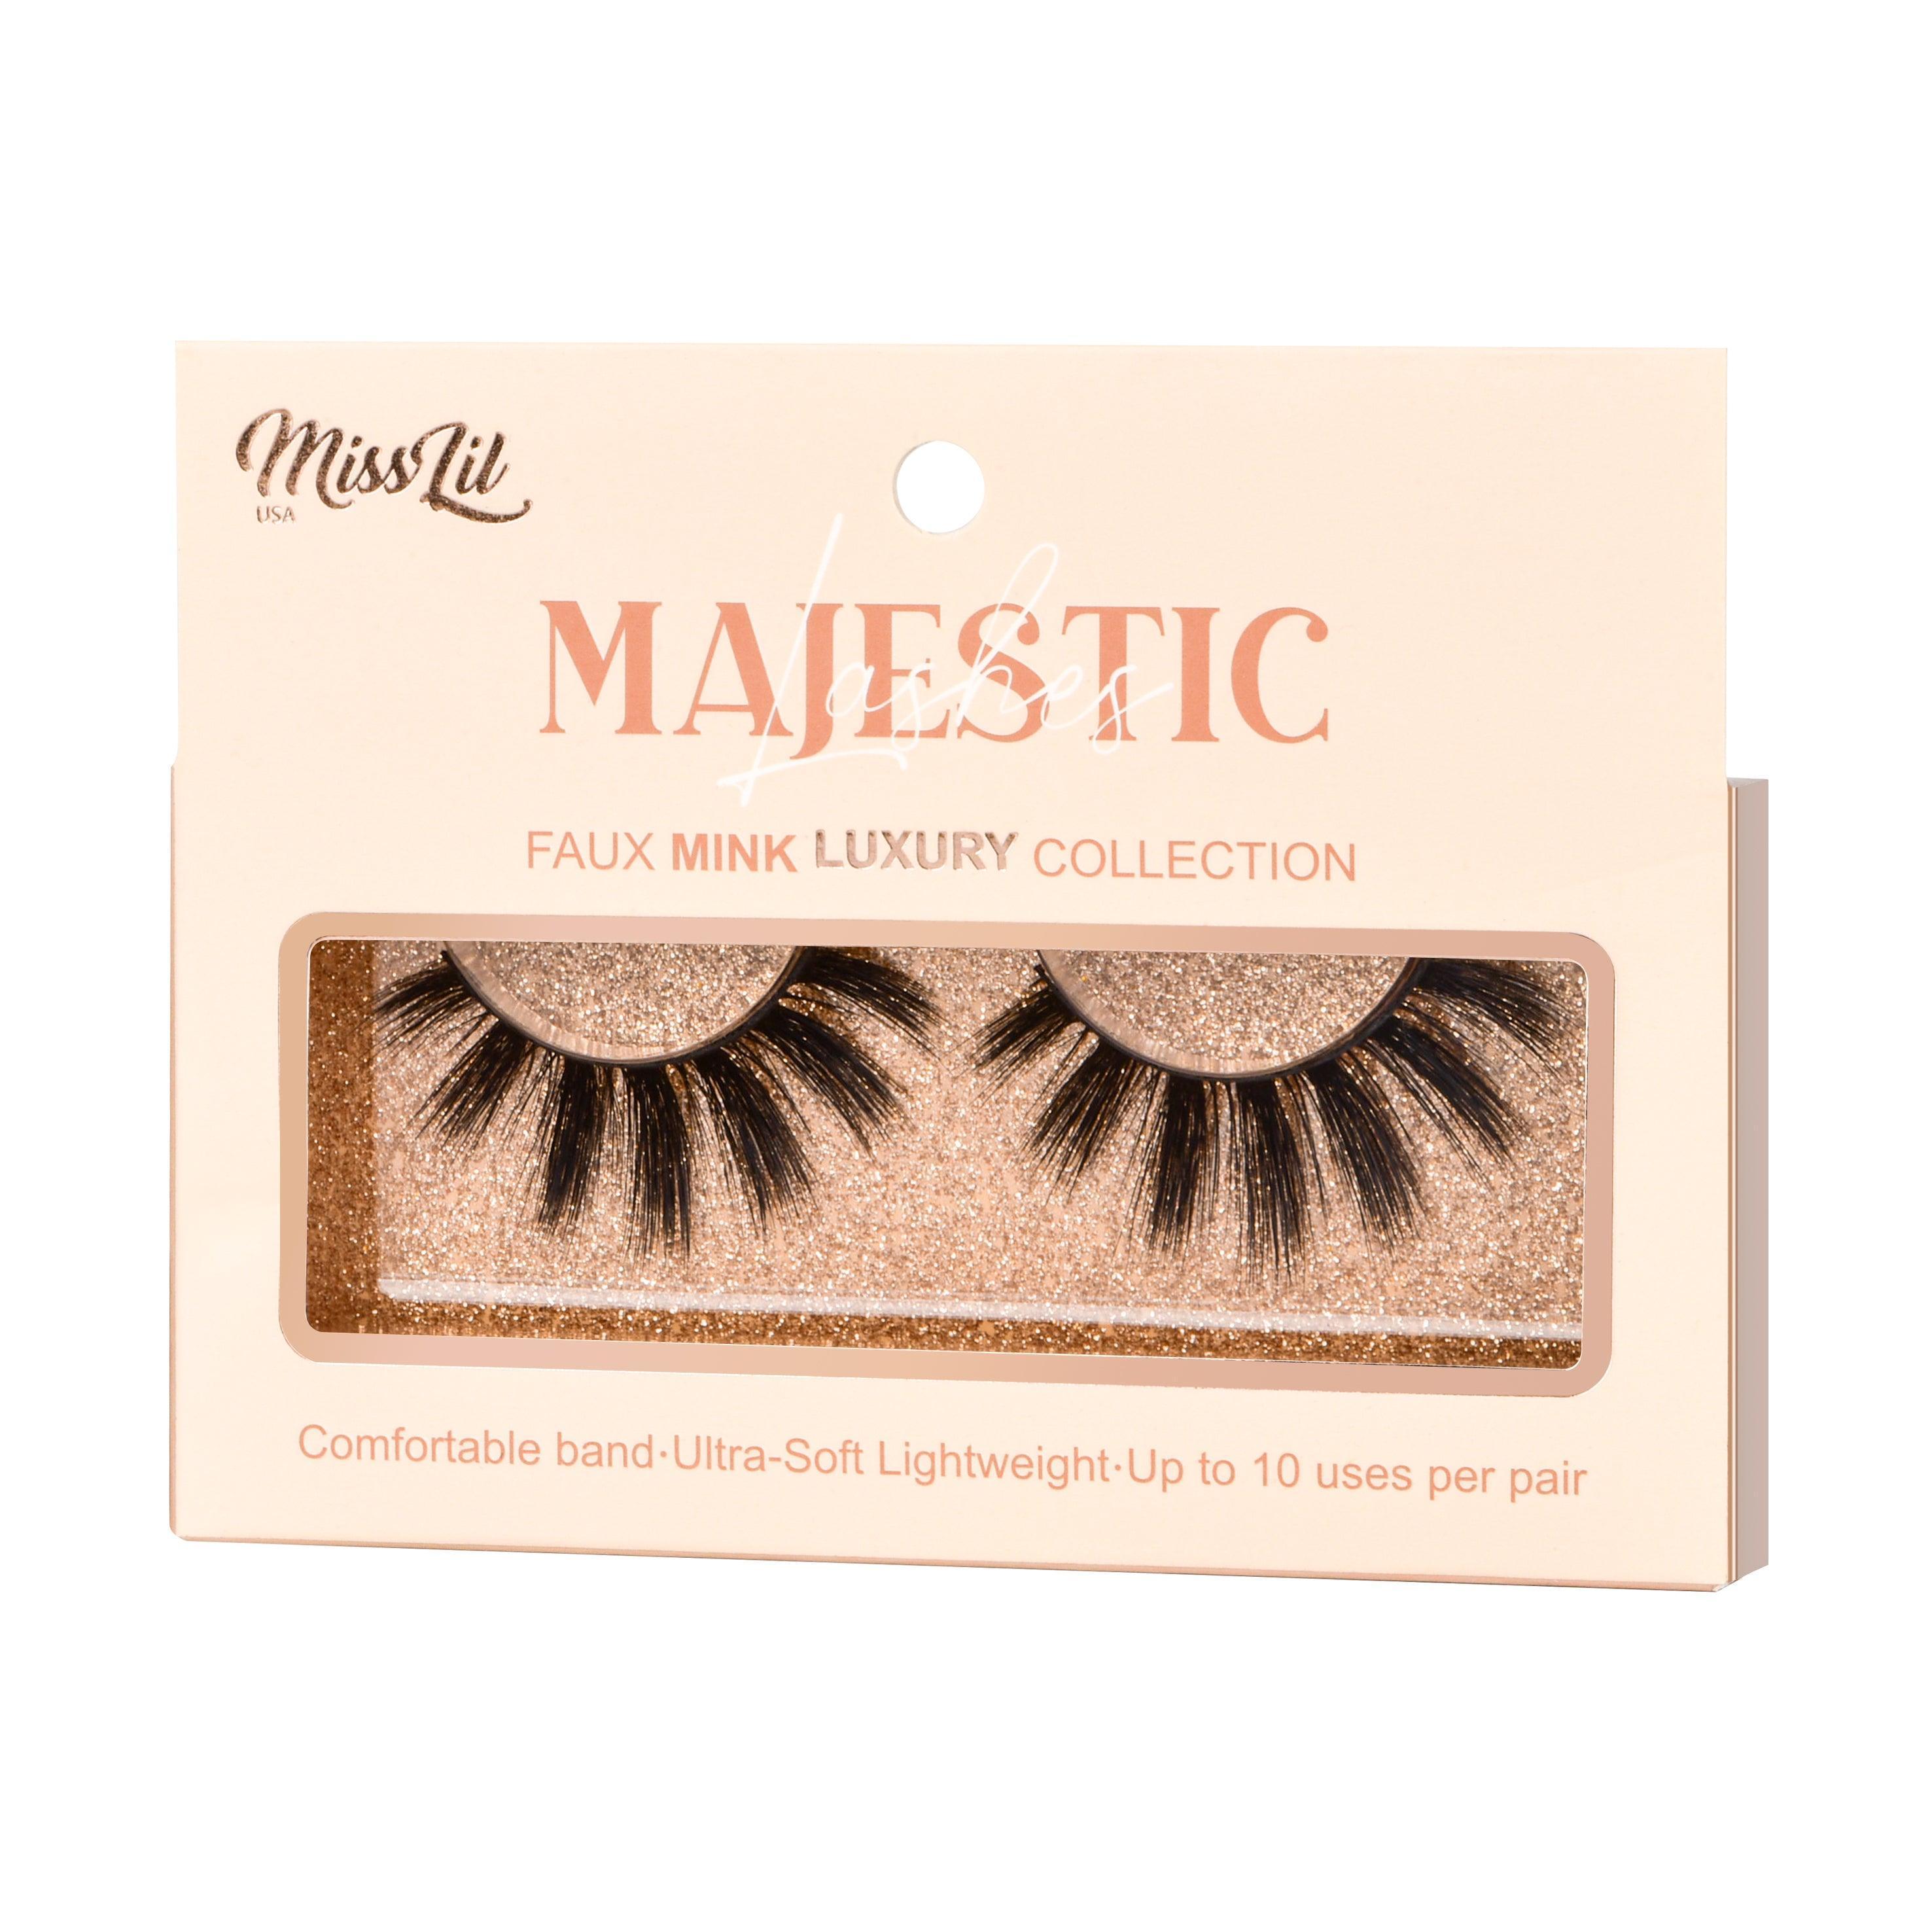 Majestic Collection 17 fake lashes - Miss Lil USA Wholesale